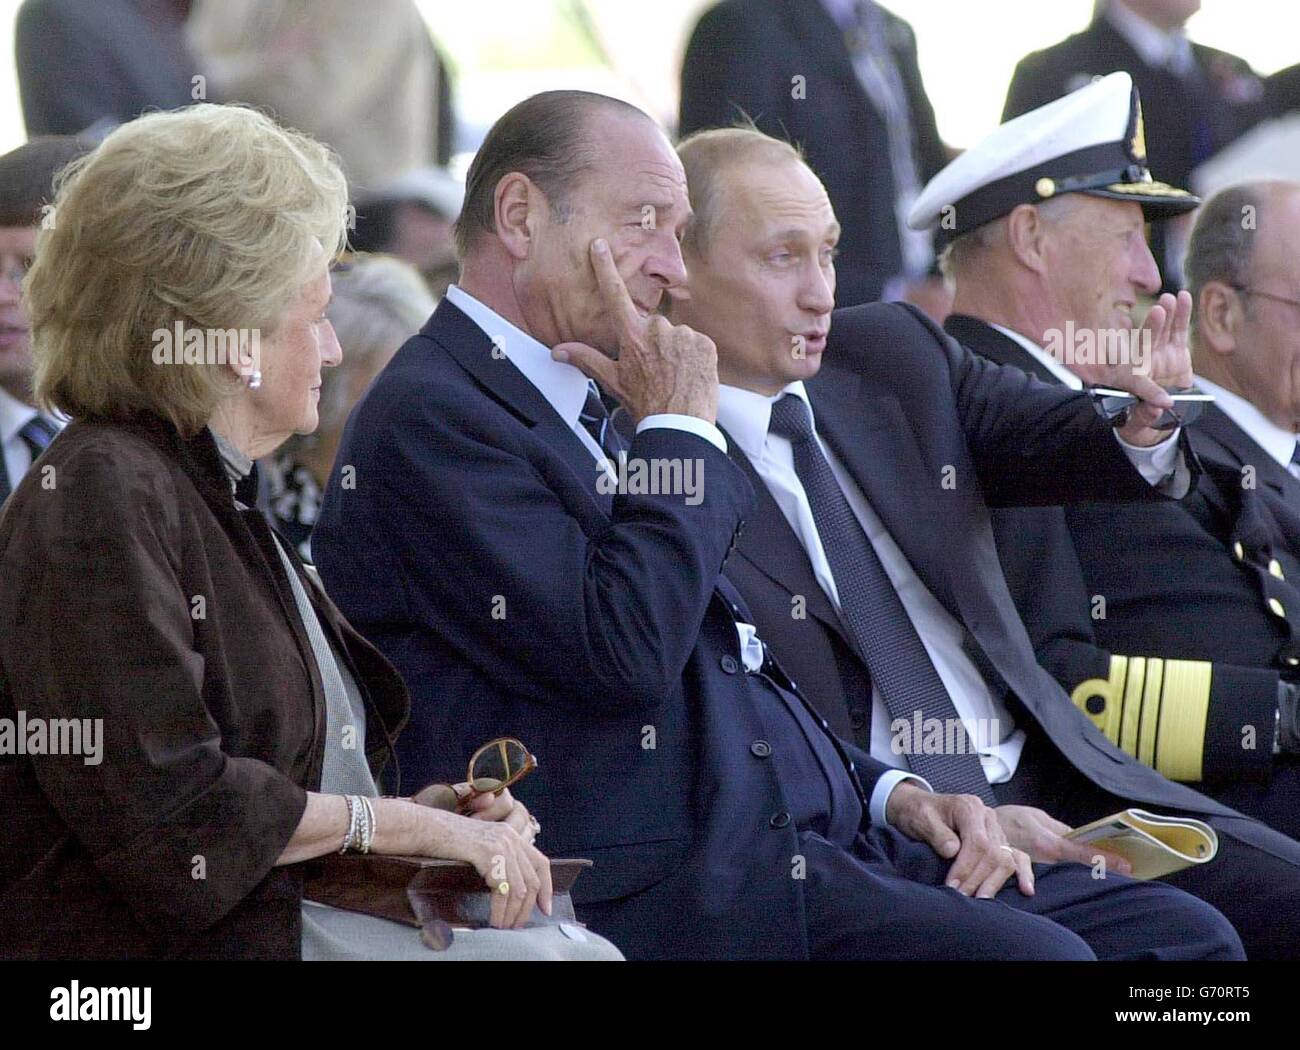 French President Jacques Chirac, is flanked by his wife Bernadette and Russian President Vladimir Putin during the International Ceremony at Arromanches, celebrating the 60th anniversary of the Normandy landings. Stock Photo